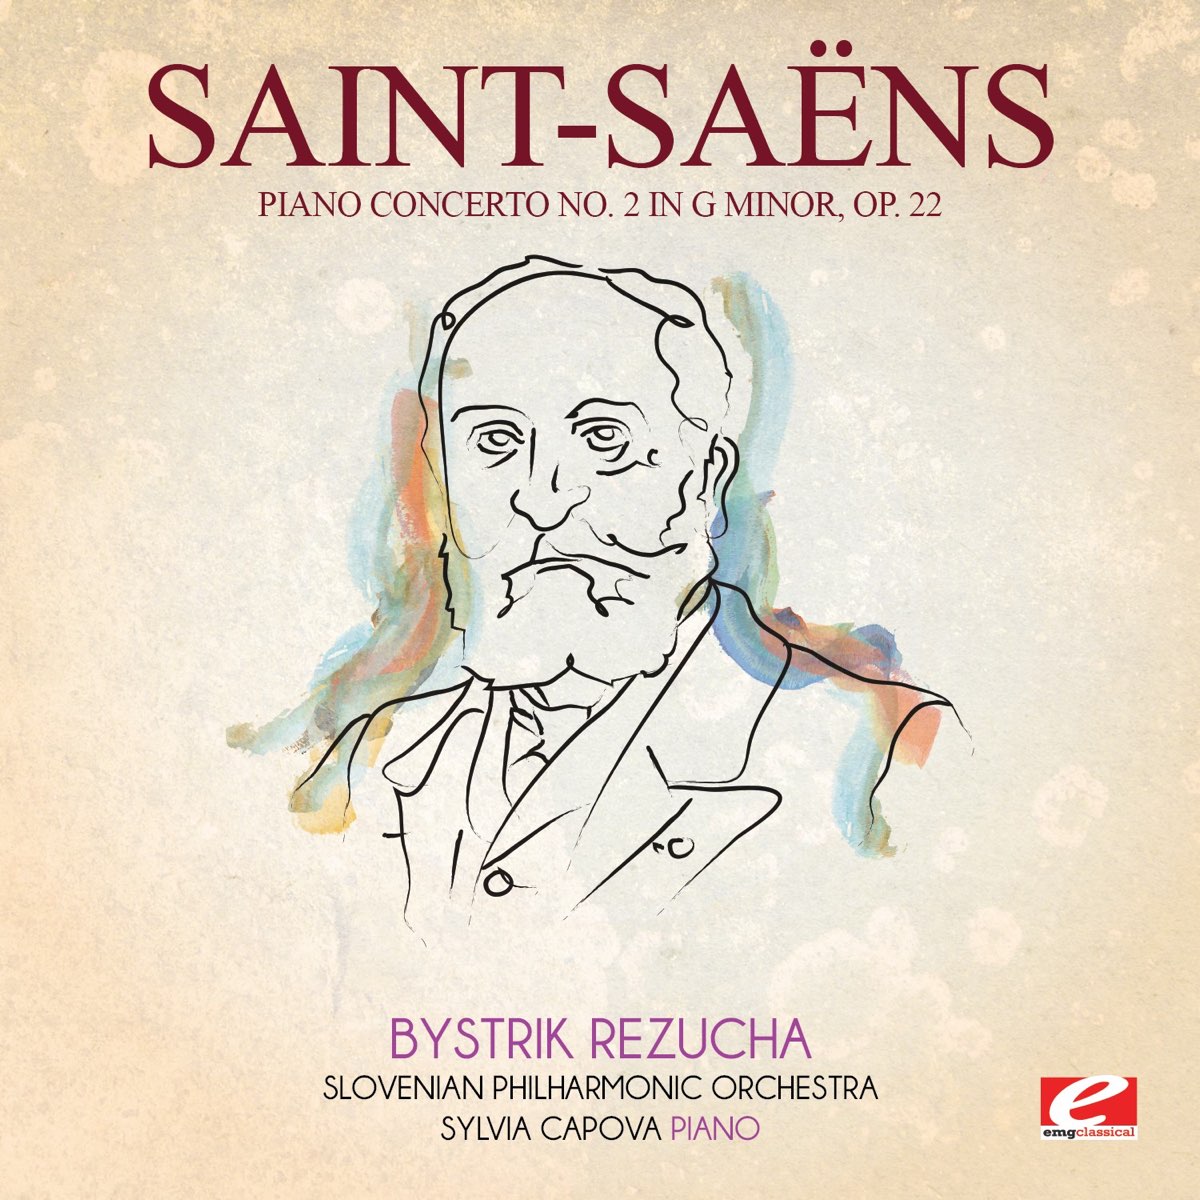 Saint-Saëns: Piano Concerto No. 2 in G Minor, Op. 22 (Remastered) - EP by  Slovenian Philharmonic Orchestra, Sylvia Capova & Bystrik Rezucha on Apple  Music